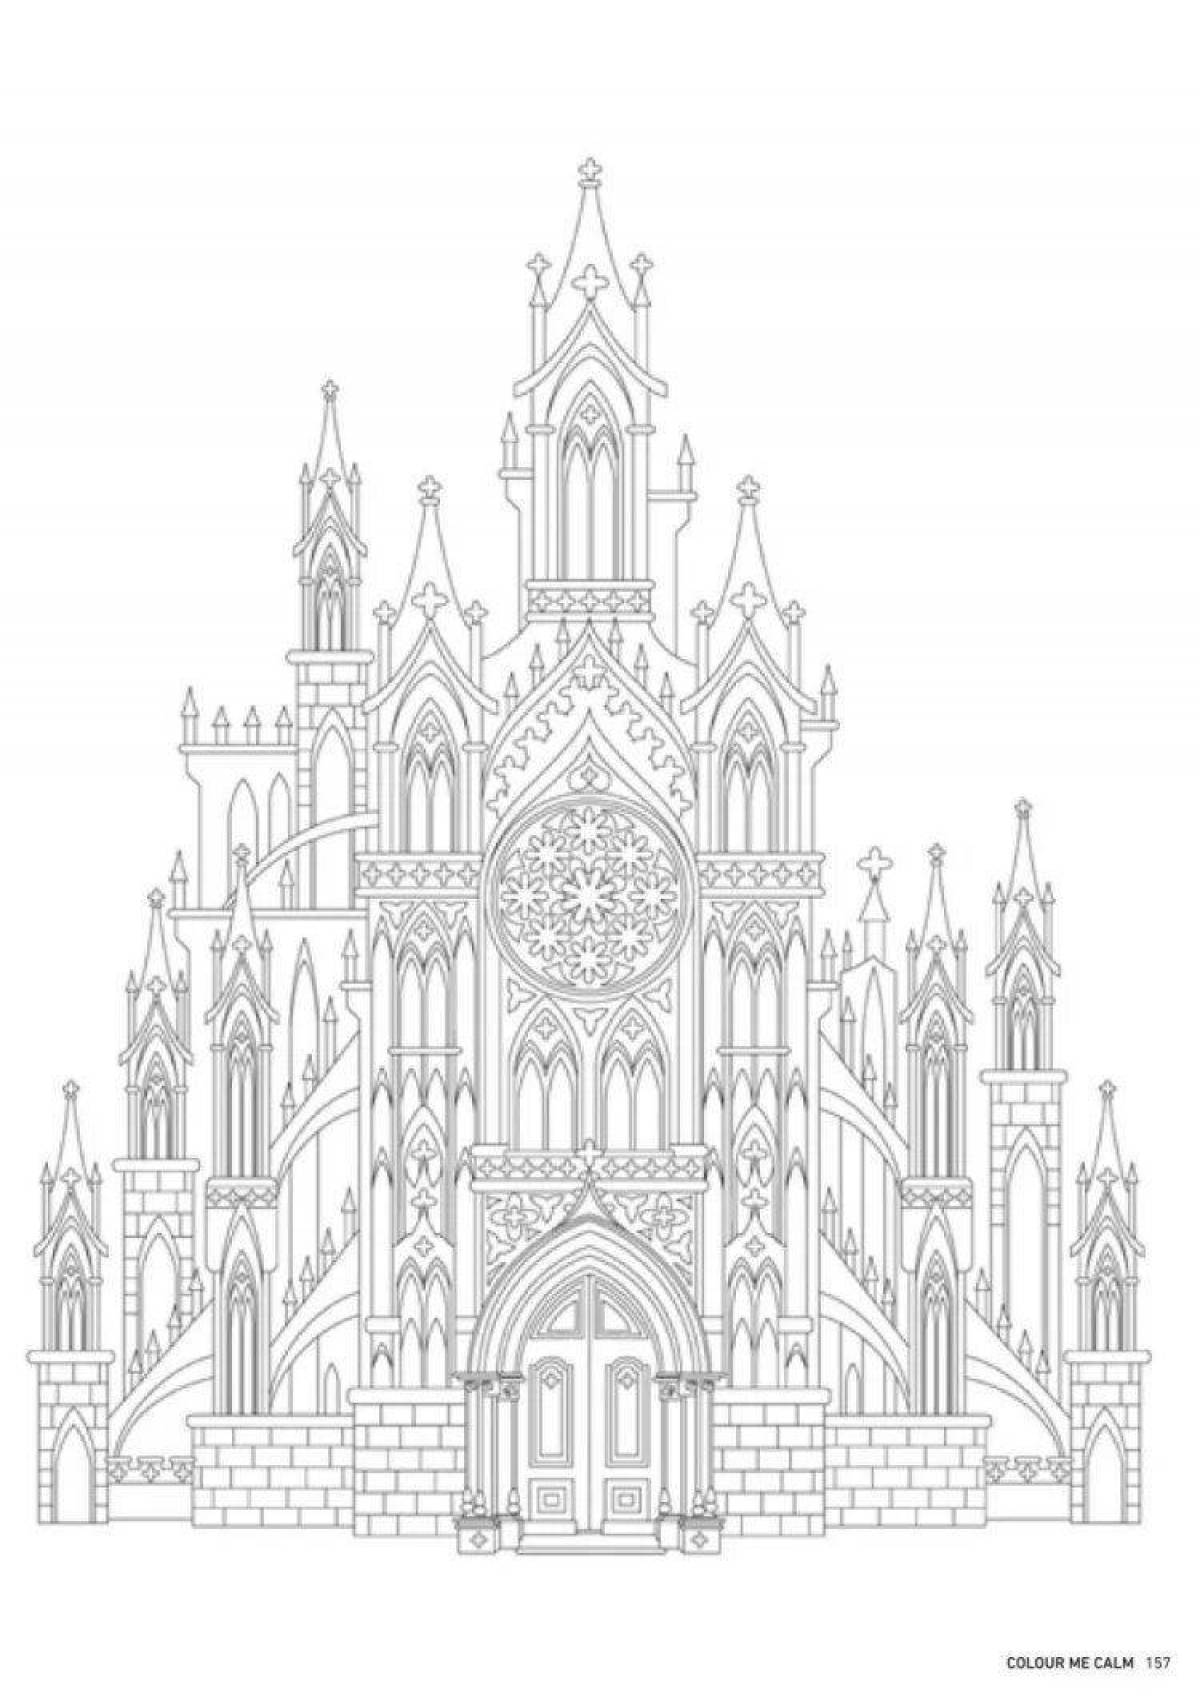 Coloring book of a magnificent gothic castle